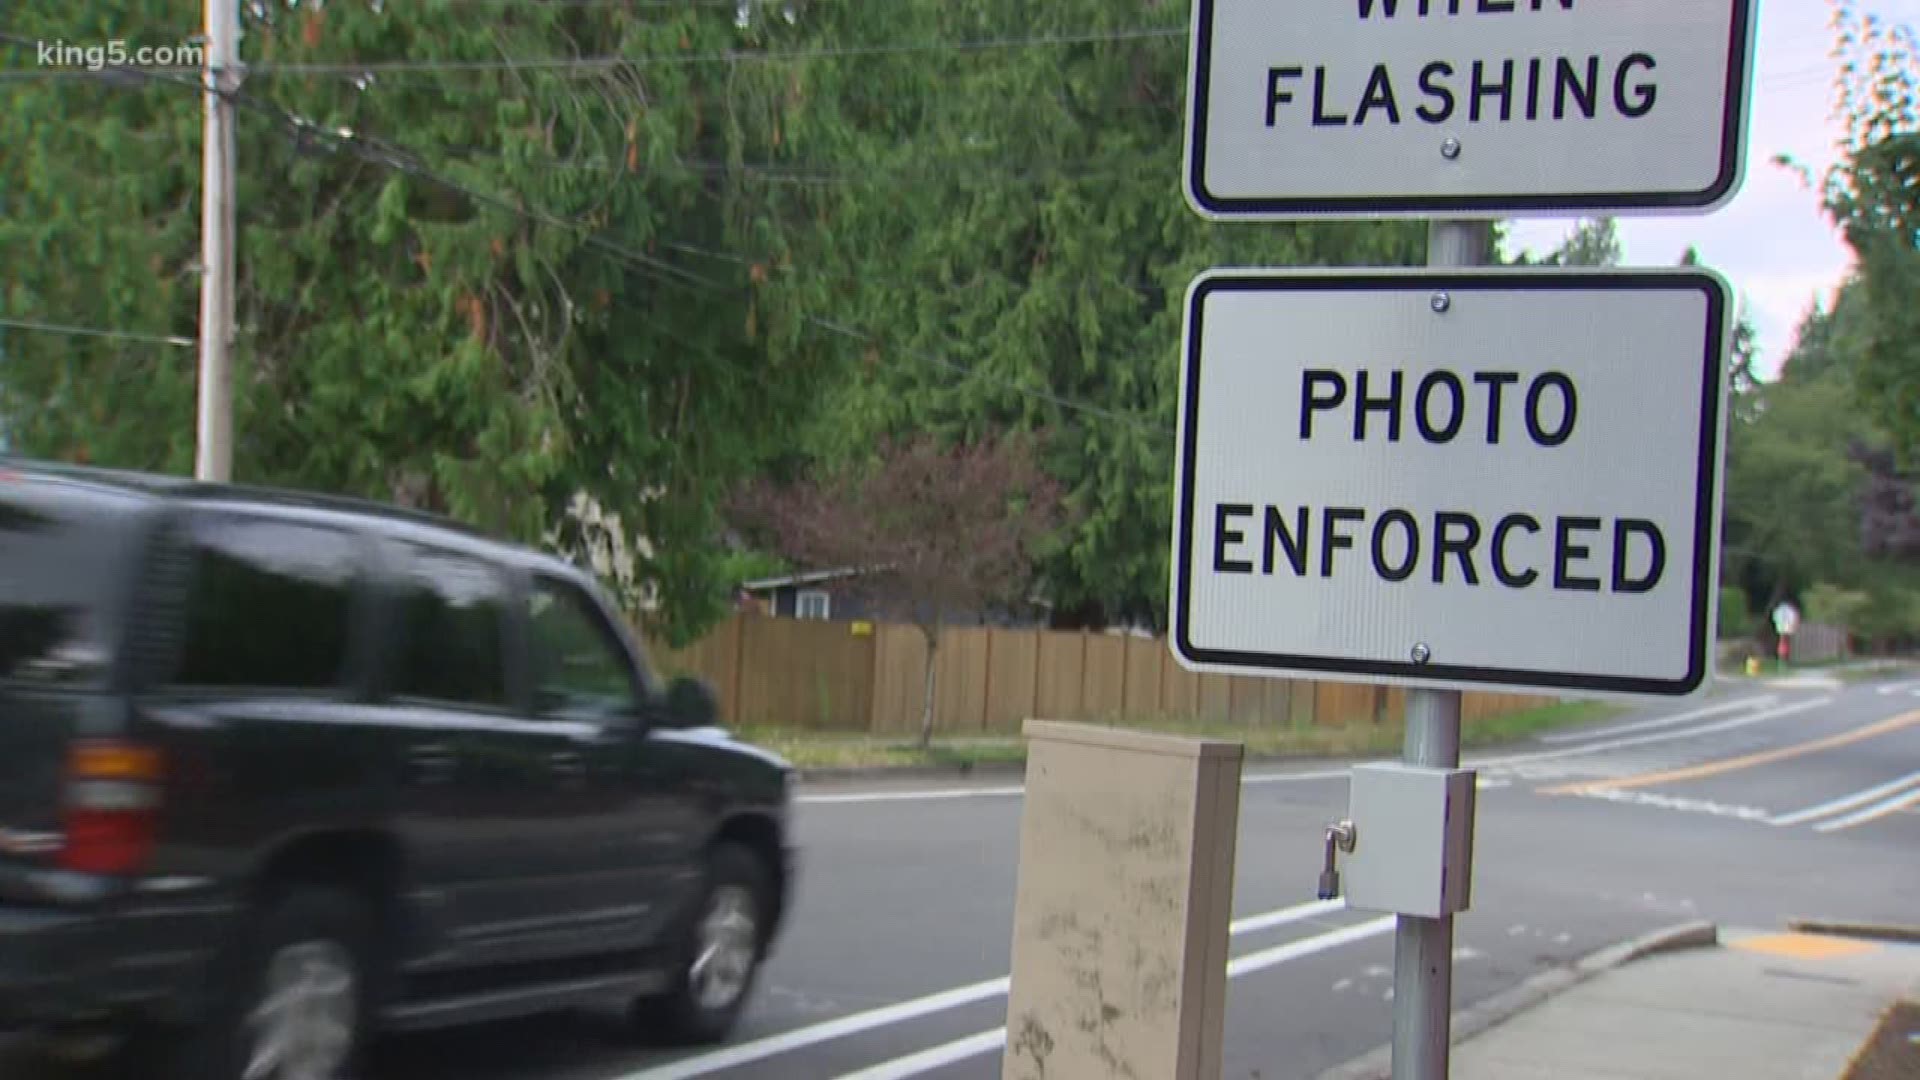 The city of Kirkland hopes to keep school kids safe by using photo enforcement to deter speeders.